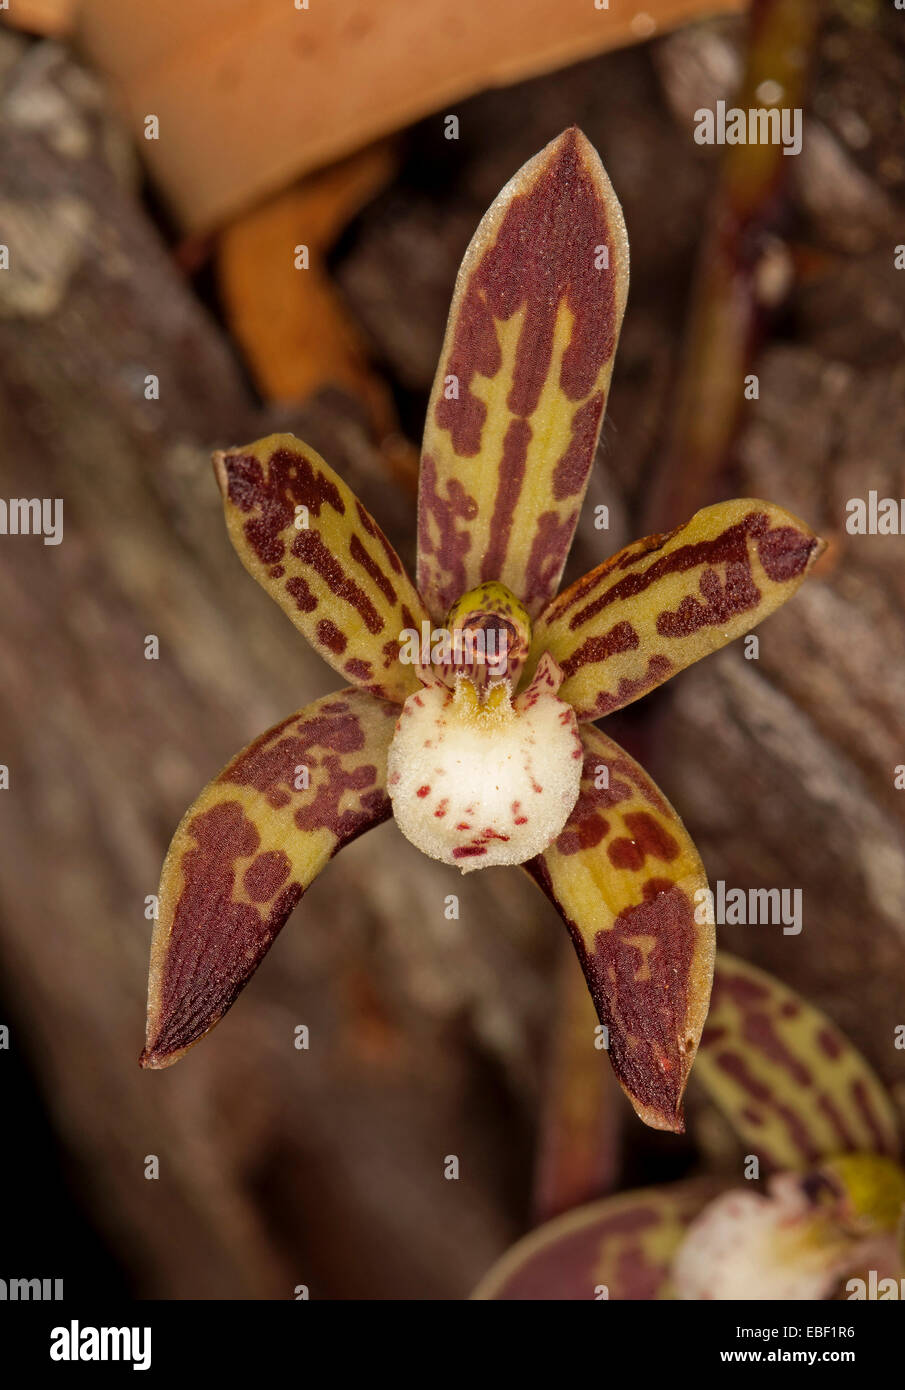 Close up of tiny brown & yellow flower of Australian native black orchid Cymbidium caniculatum, an epiphytic species Stock Photo